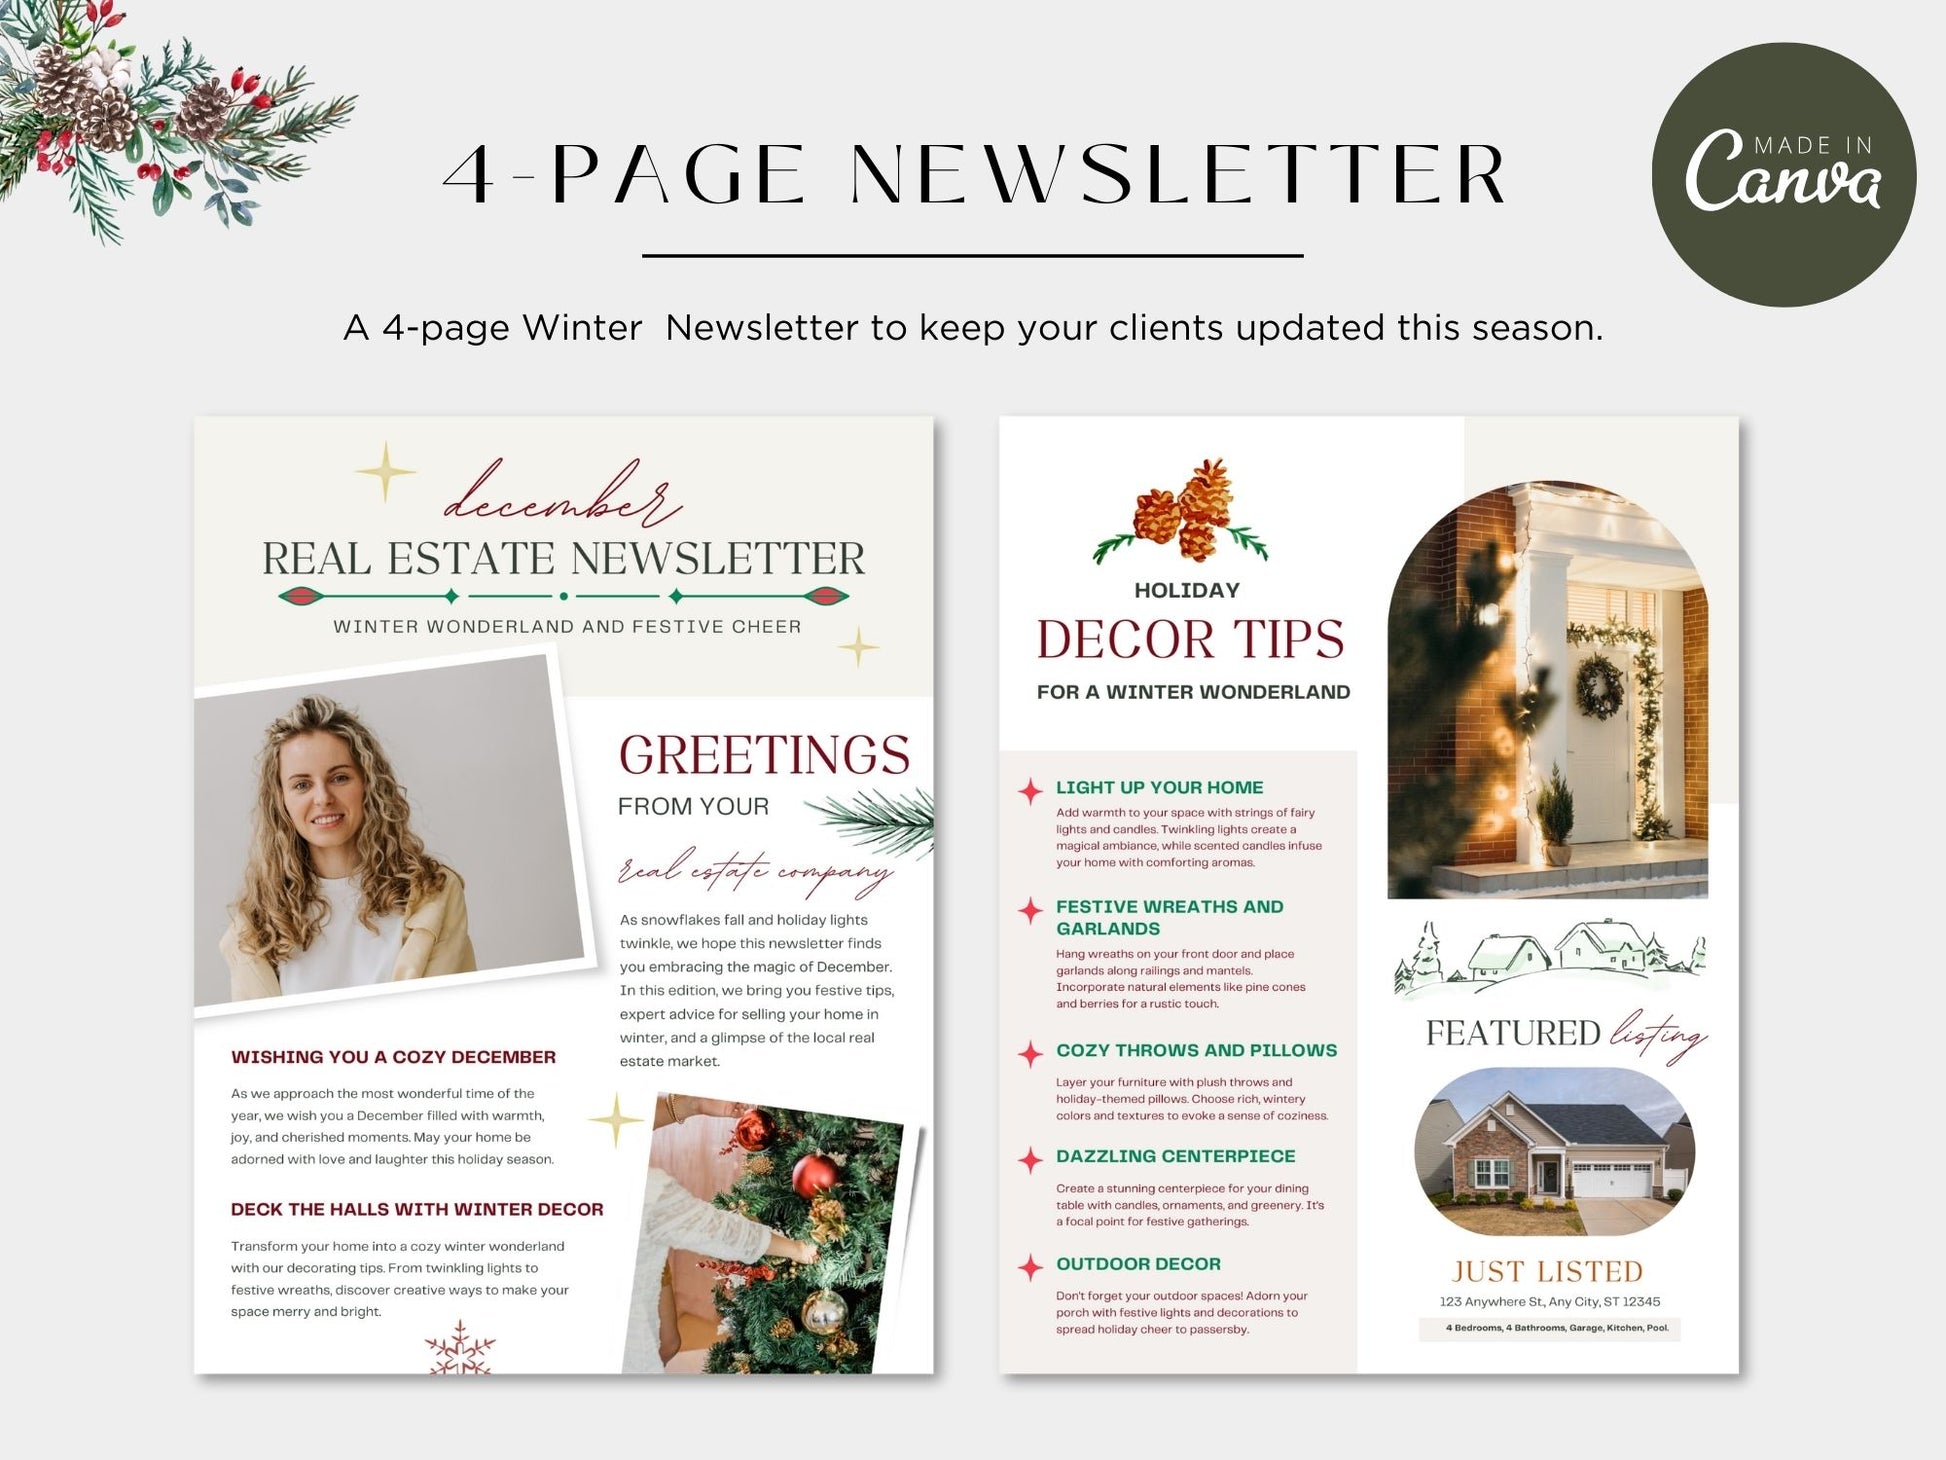 Real Estate Winter Newsletter 2023 - Valuable Insights for the Winter Real Estate Market